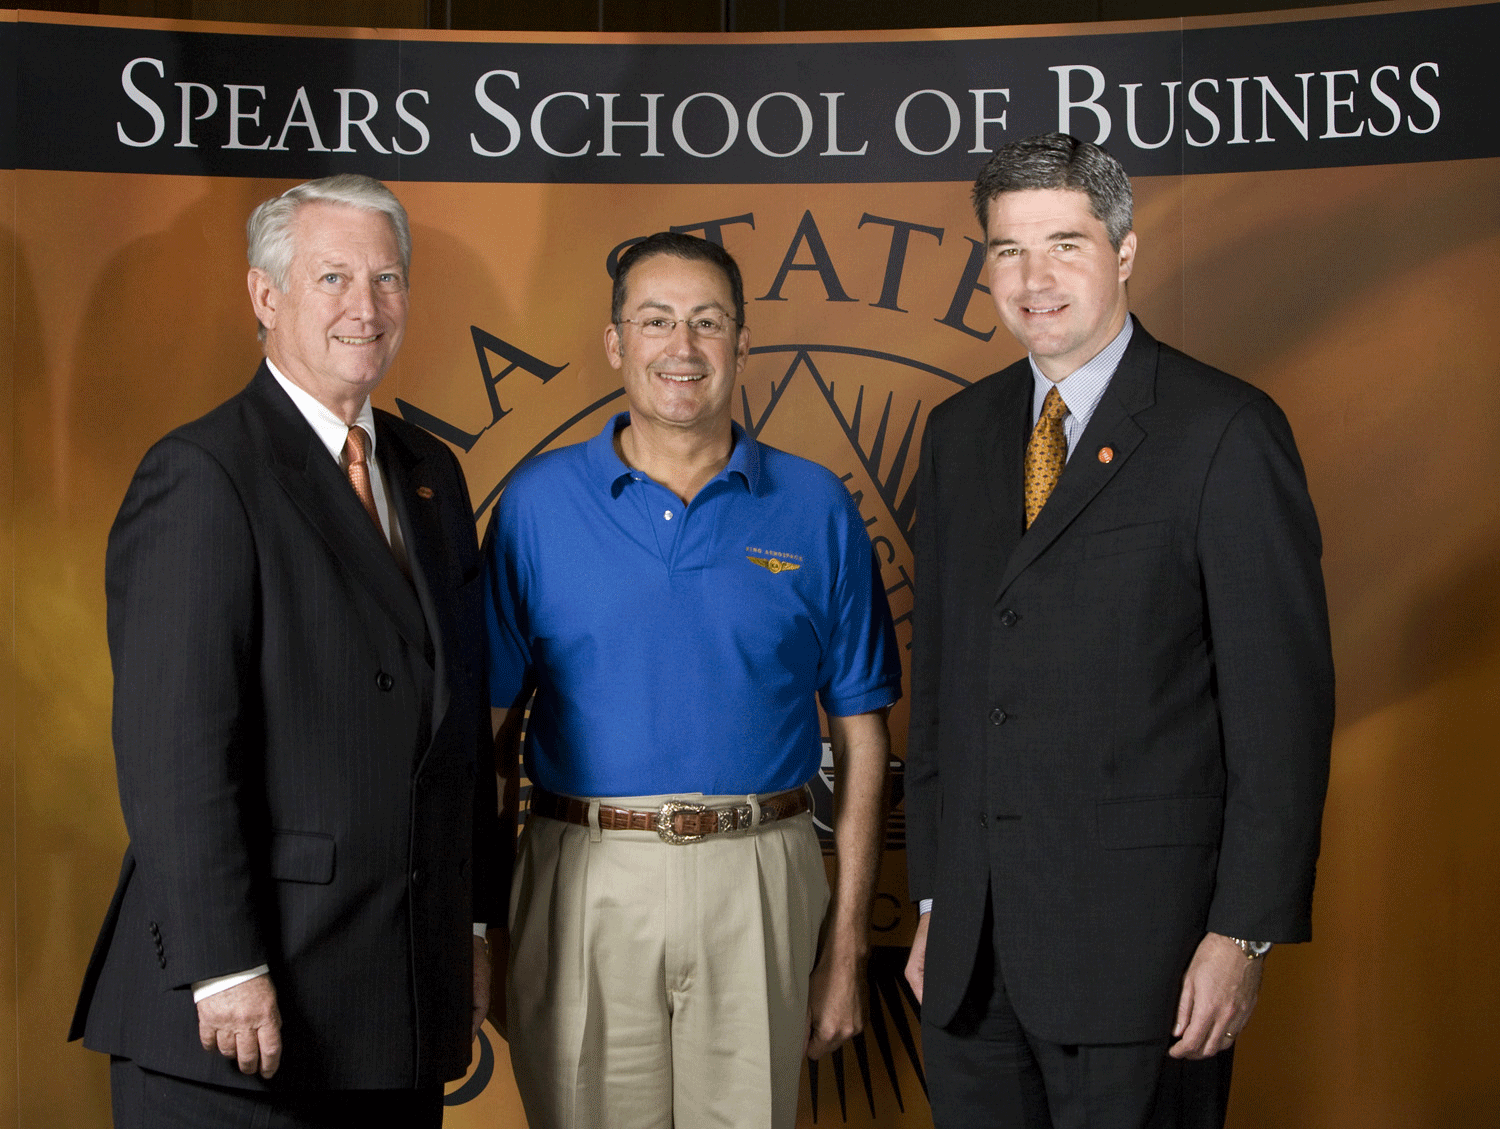 Leading executives (from right) Paul Cornell of SpiritBank, Jerry King of King Aerospace Inc., and Tucker Link of Knightsbridge Investments Ltd. came to Oklahoma State University on Tuesday, April 5 to discuss challenges facing the business world in the 21st century.